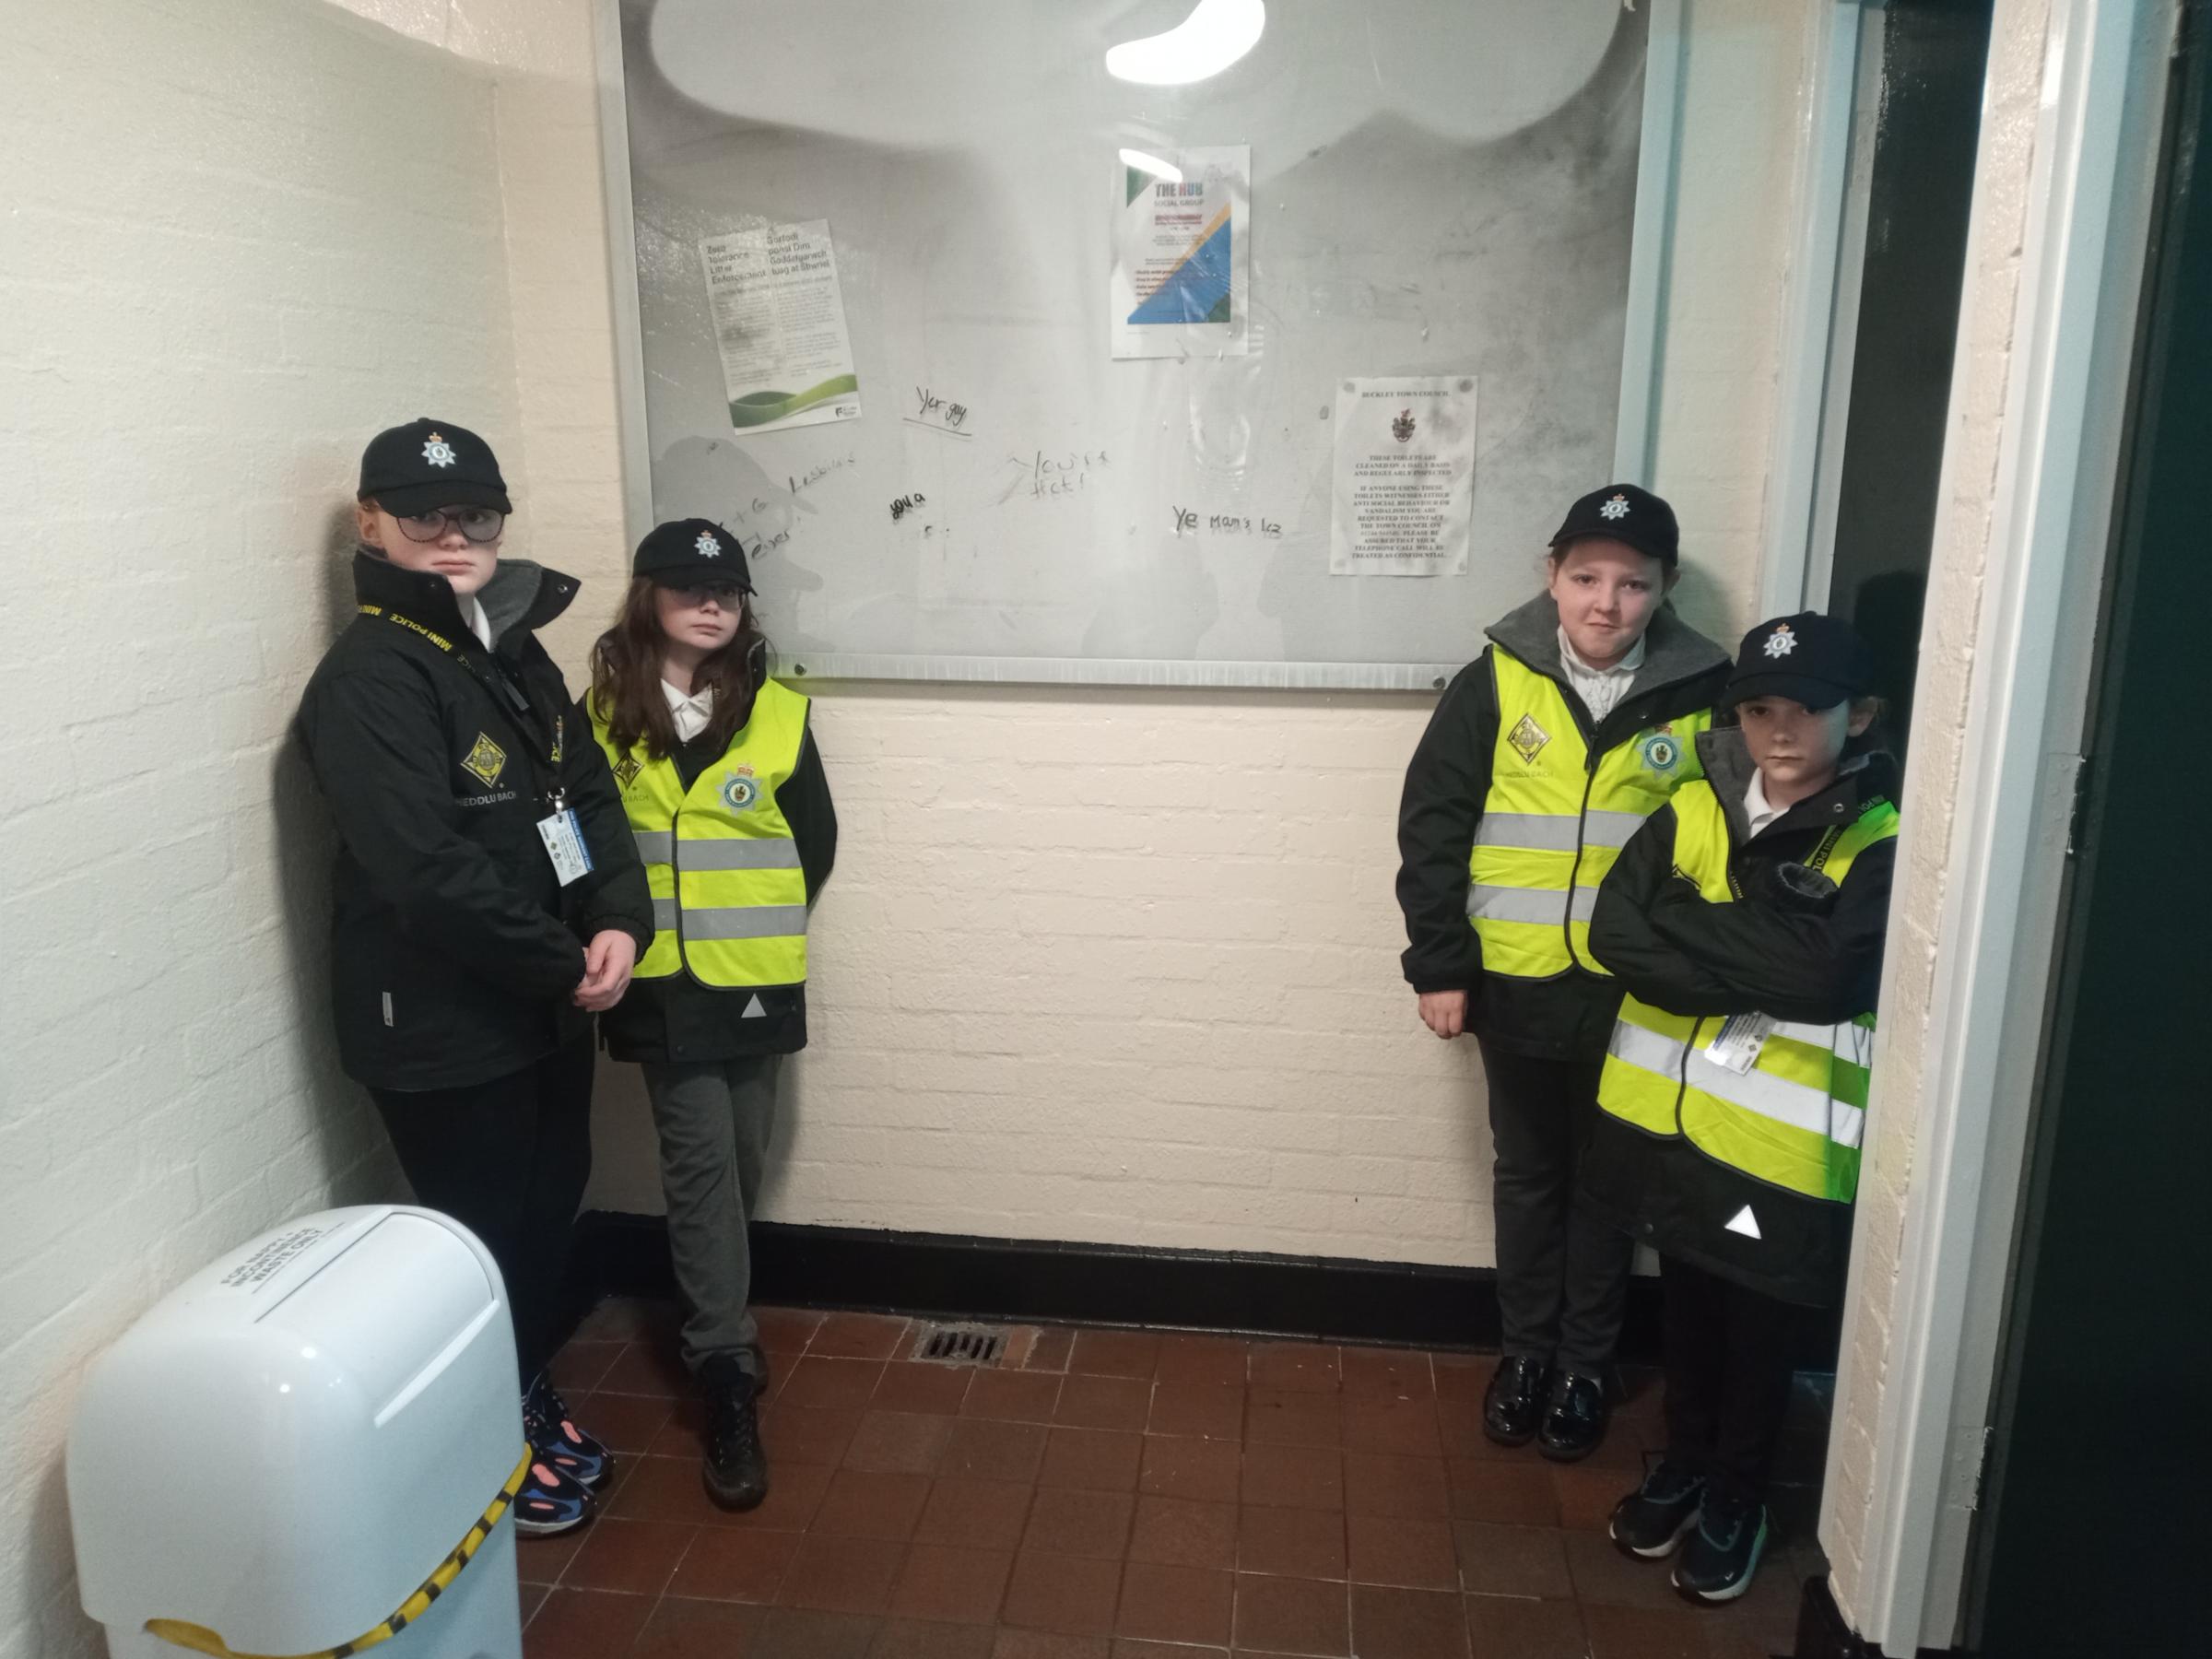 Westwood CP School Mini Police check out some of the damage to the public toilets in Buckley.